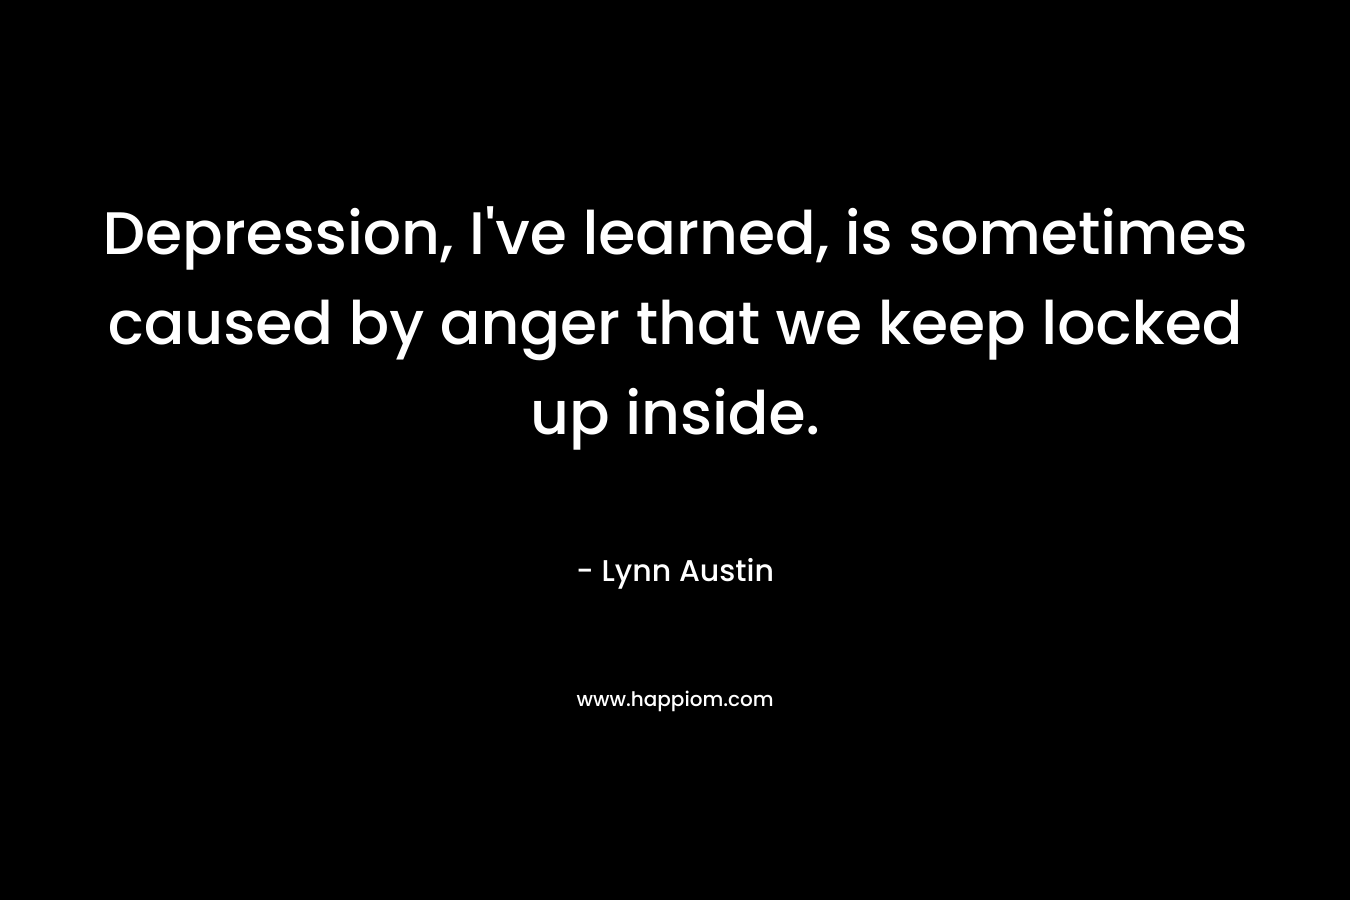 Depression, I’ve learned, is sometimes caused by anger that we keep locked up inside. – Lynn Austin